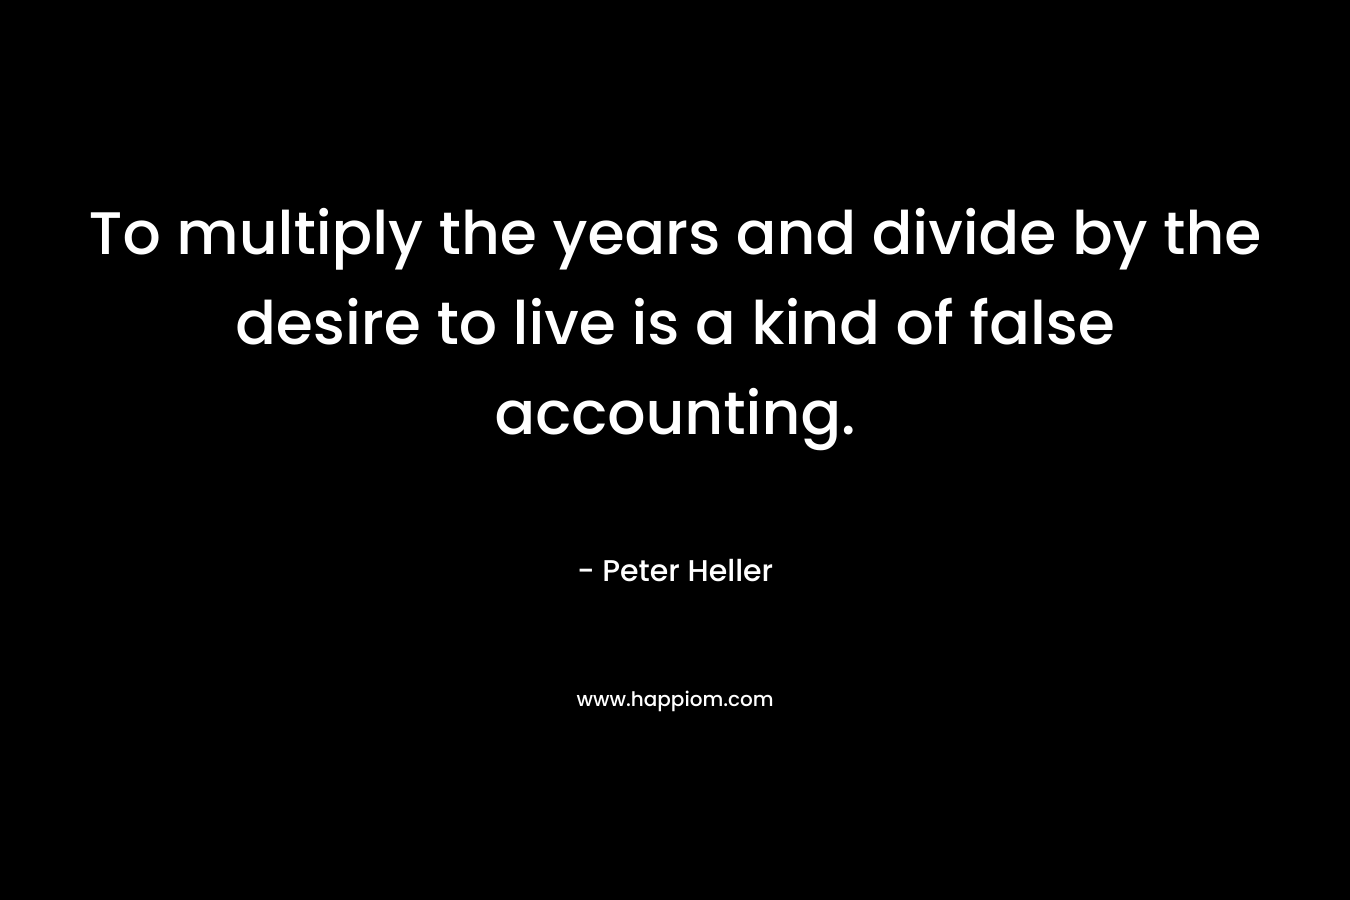 To multiply the years and divide by the desire to live is a kind of false accounting.